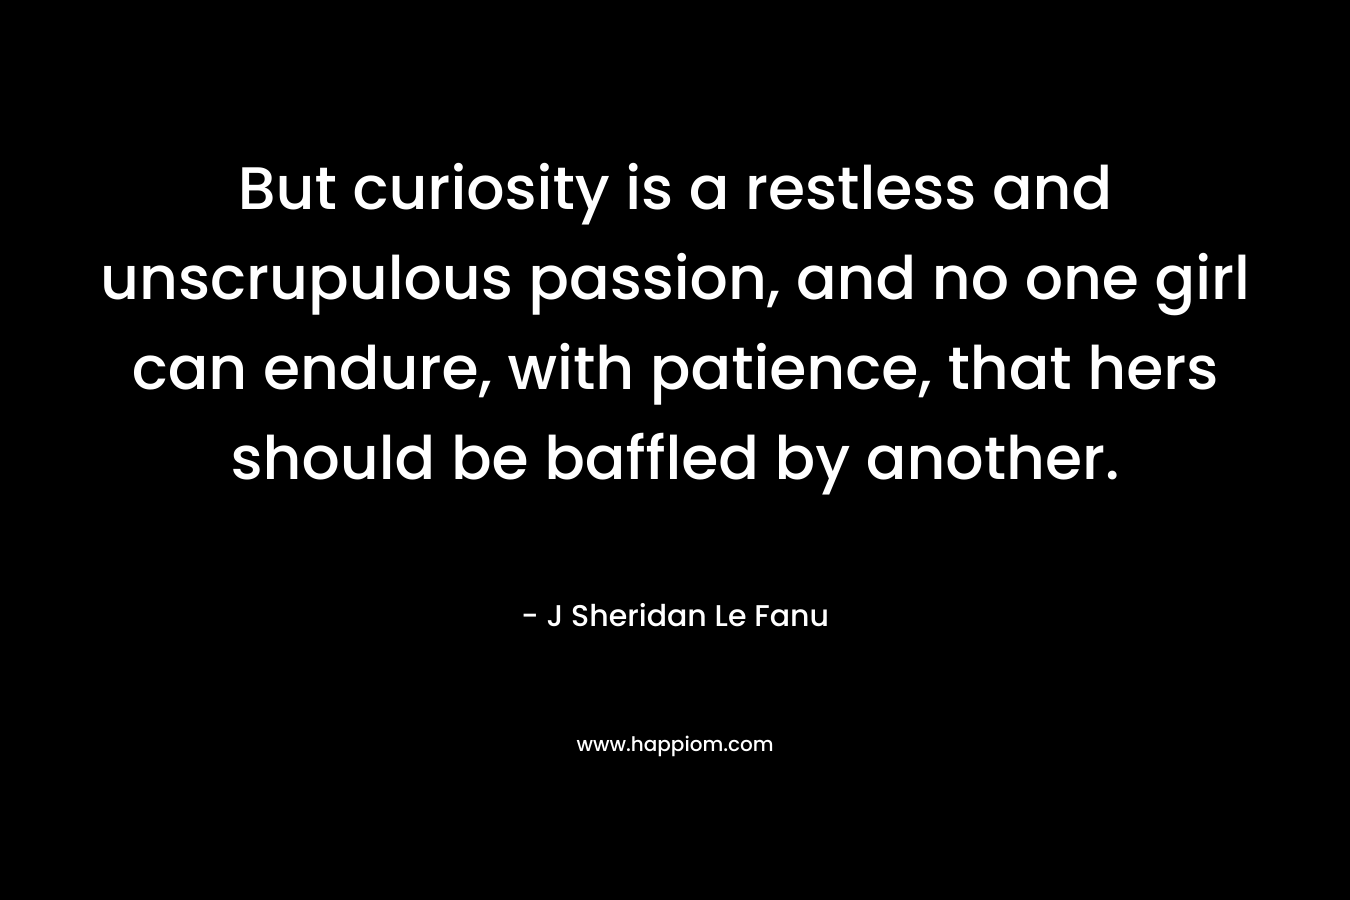 But curiosity is a restless and unscrupulous passion, and no one girl can endure, with patience, that hers should be baffled by another. – J Sheridan Le Fanu